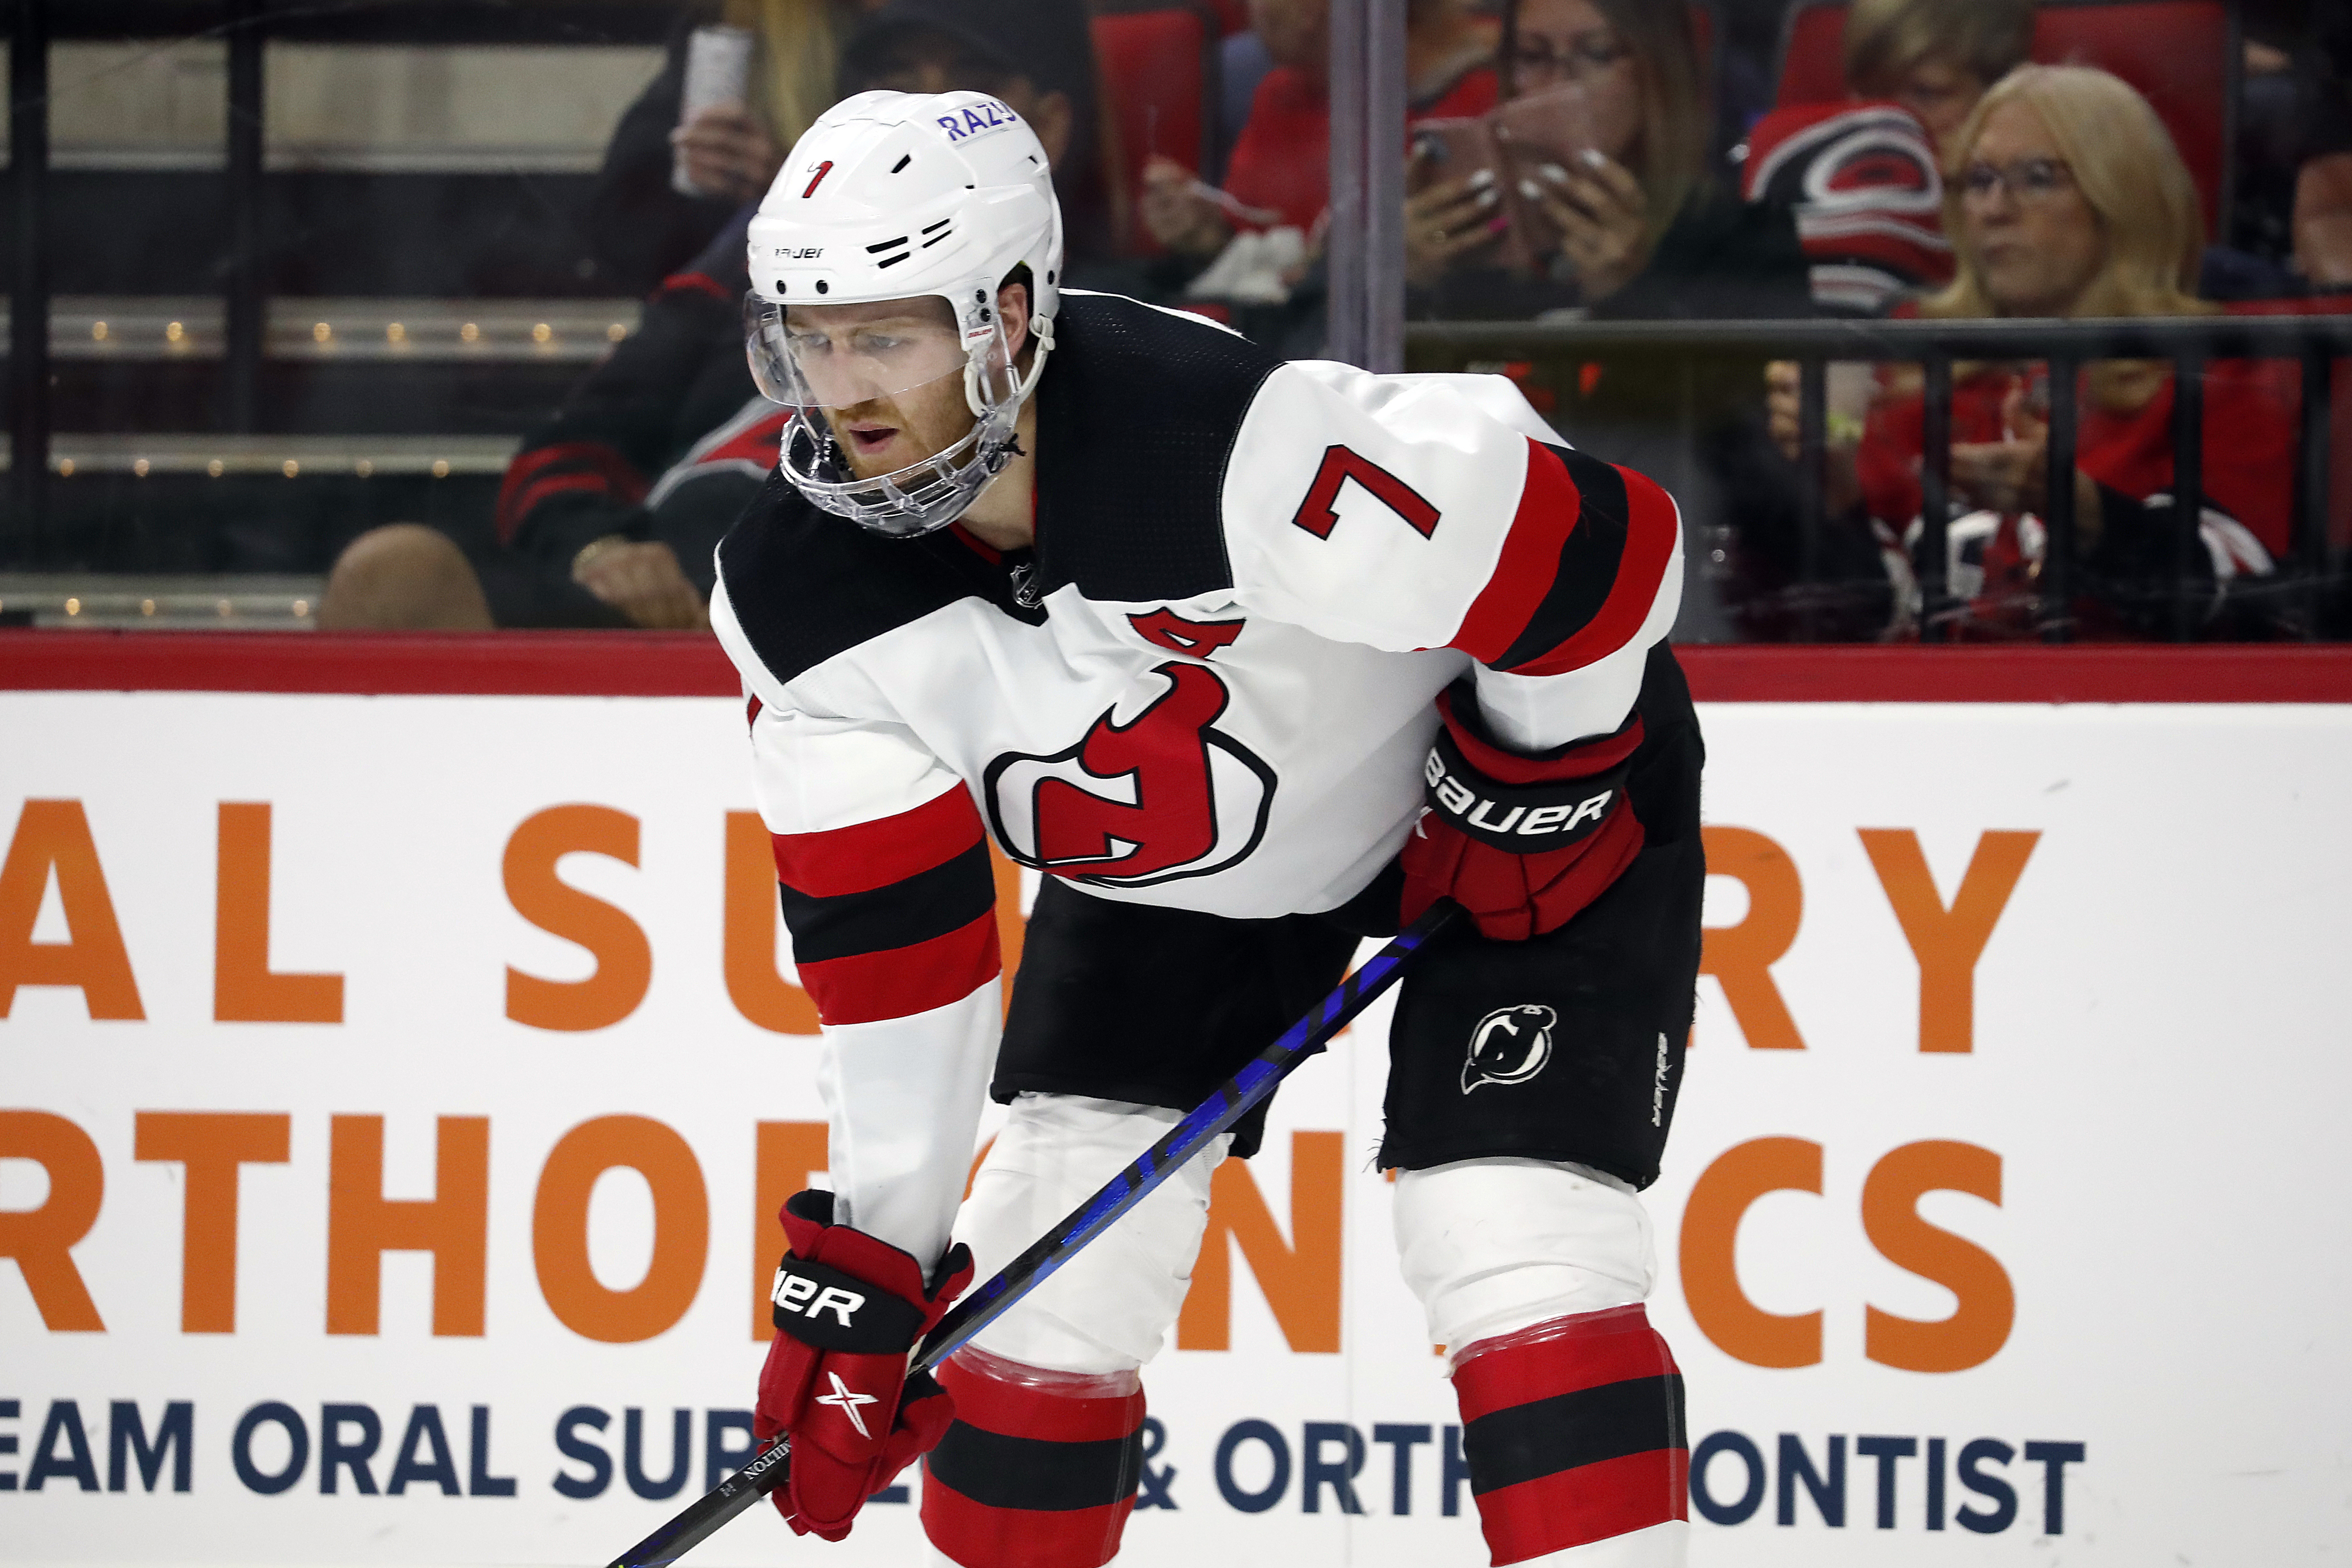 How to watch every Devils game in 2022-23 NHL season Best streaming, cable options for Devils fans